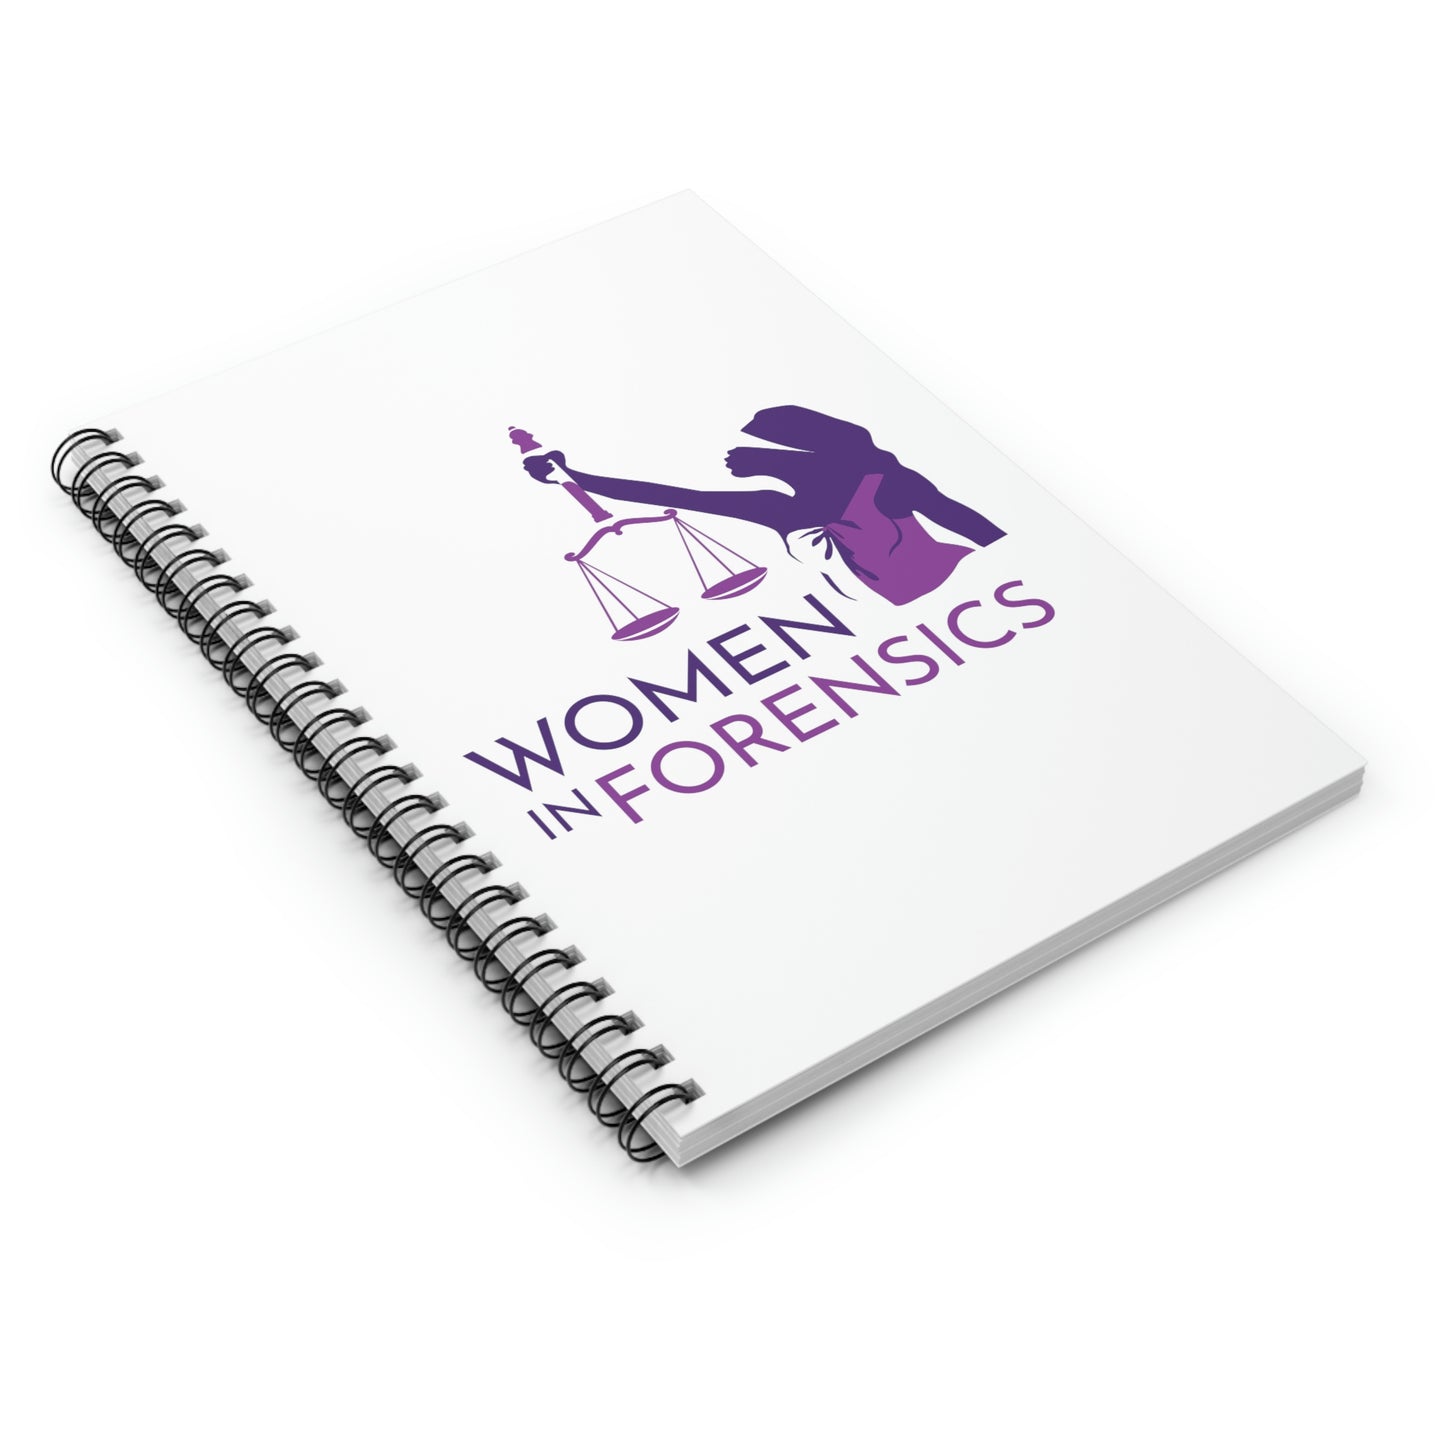 Women in Forensics Spiral Notebook - Ruled Line